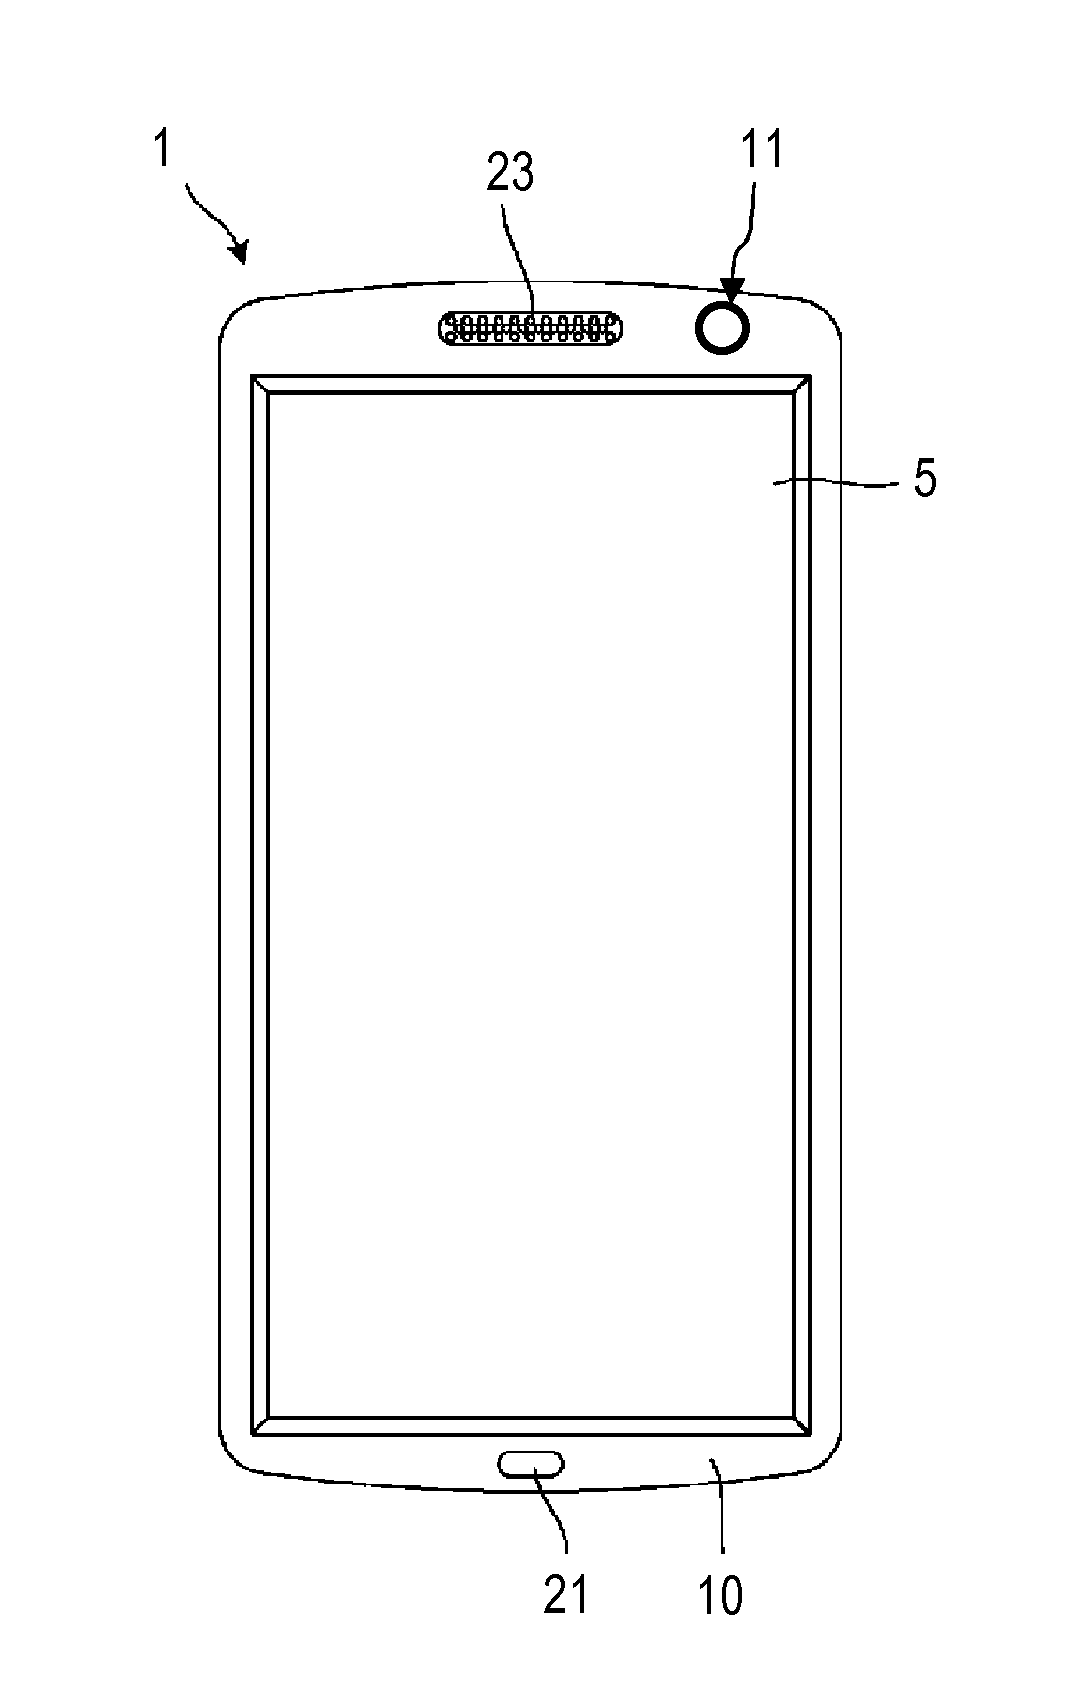 Portable Electronic Equipment and Method of Operating a User Interface